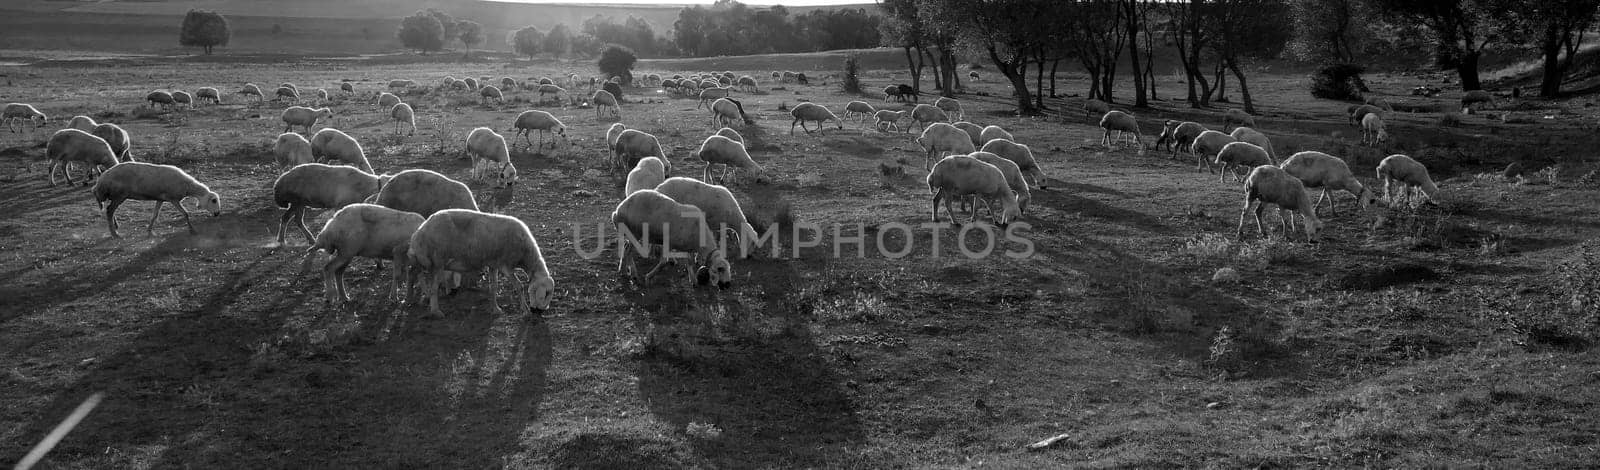 flock of sheep grazing in the field, sheep and lambs grazing in the open field, flock of sheep,